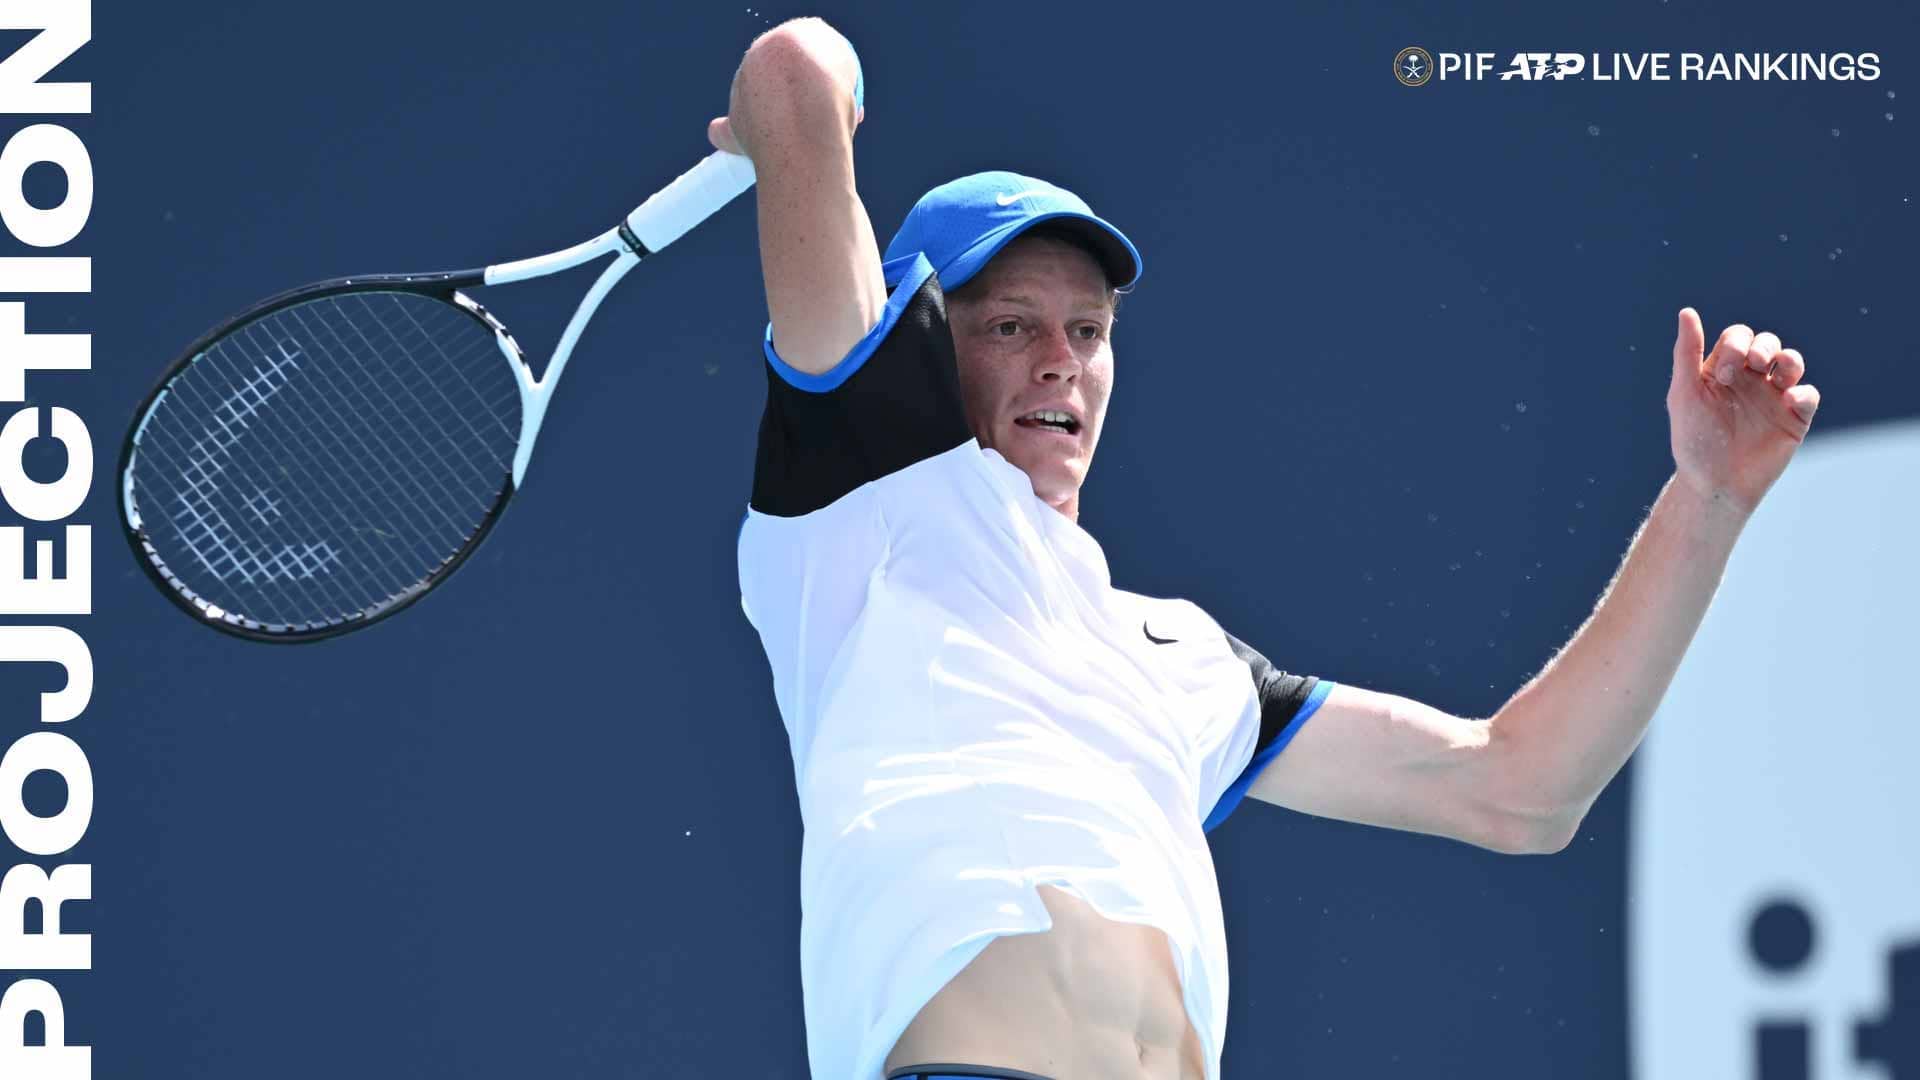 Jannik Sinner is two wins from reaching a career-high PIF ATP Ranking.